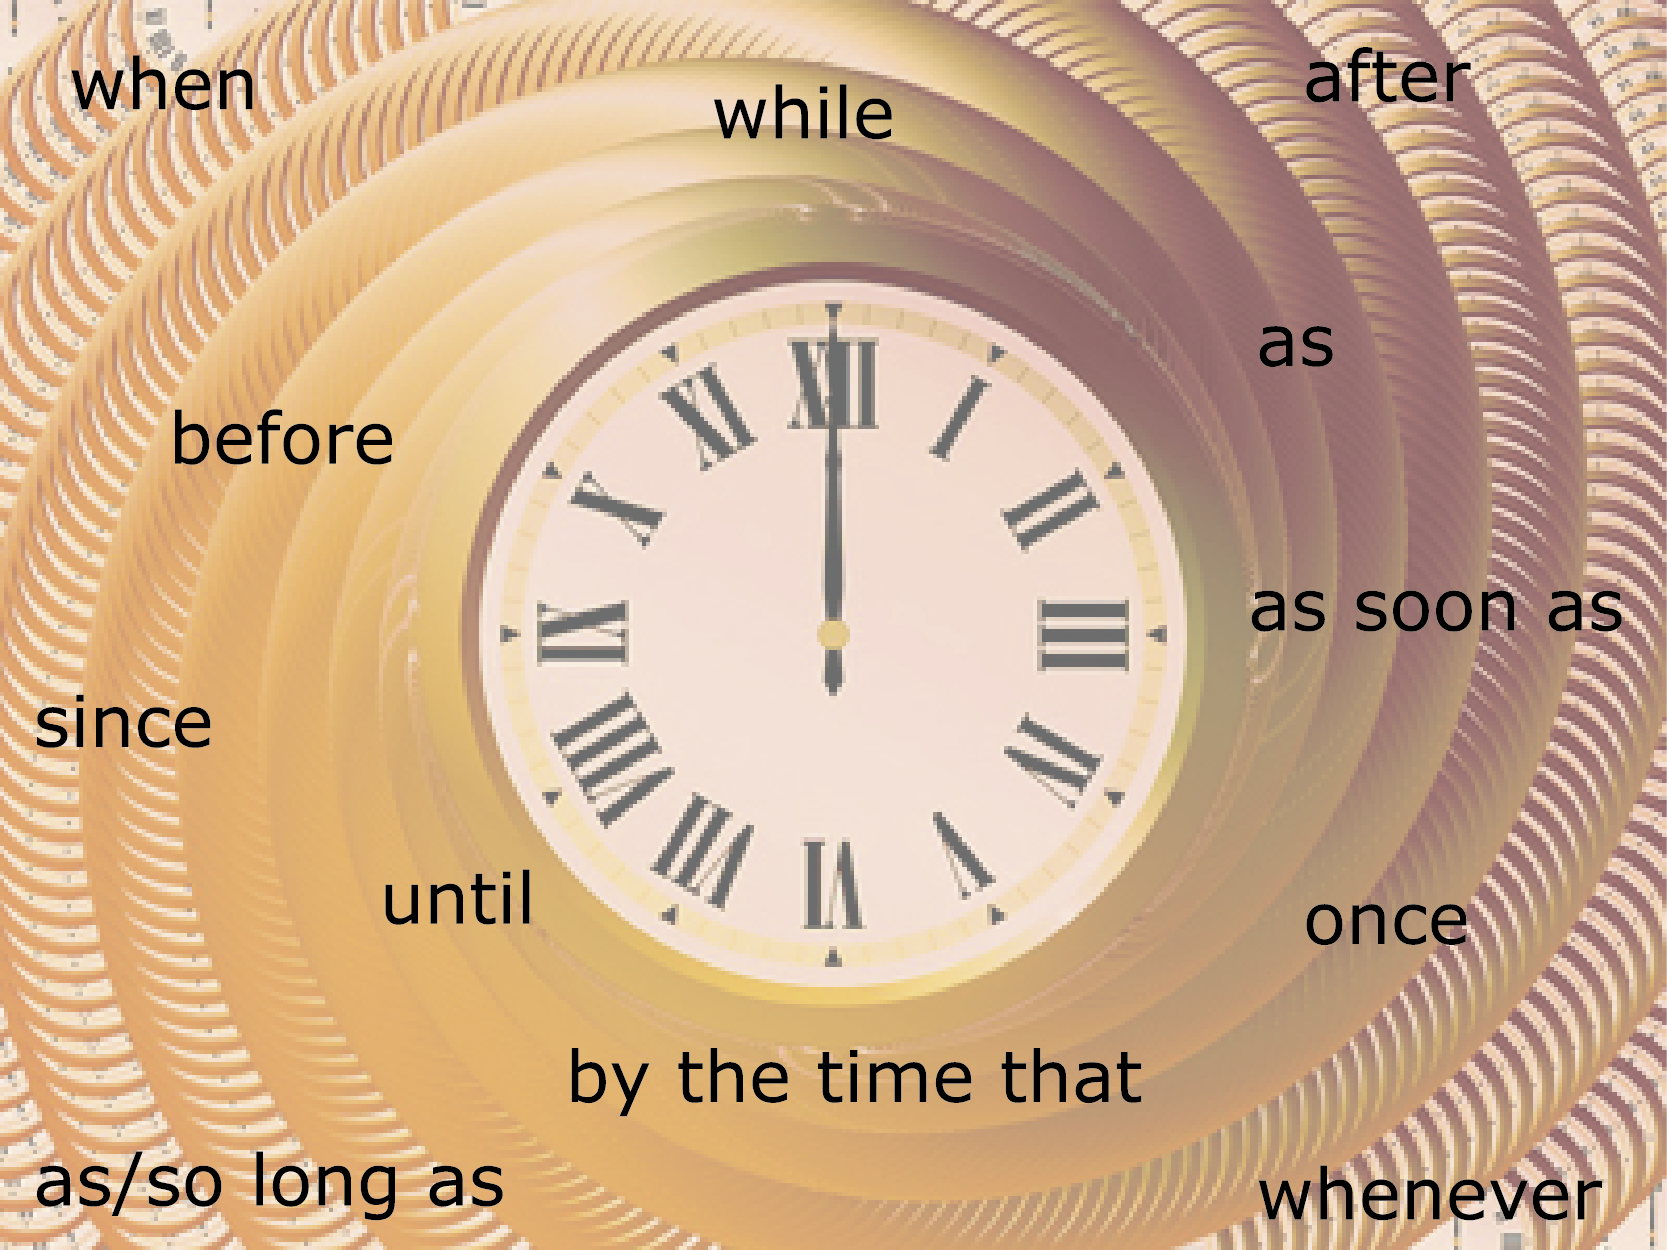 Clock and time words